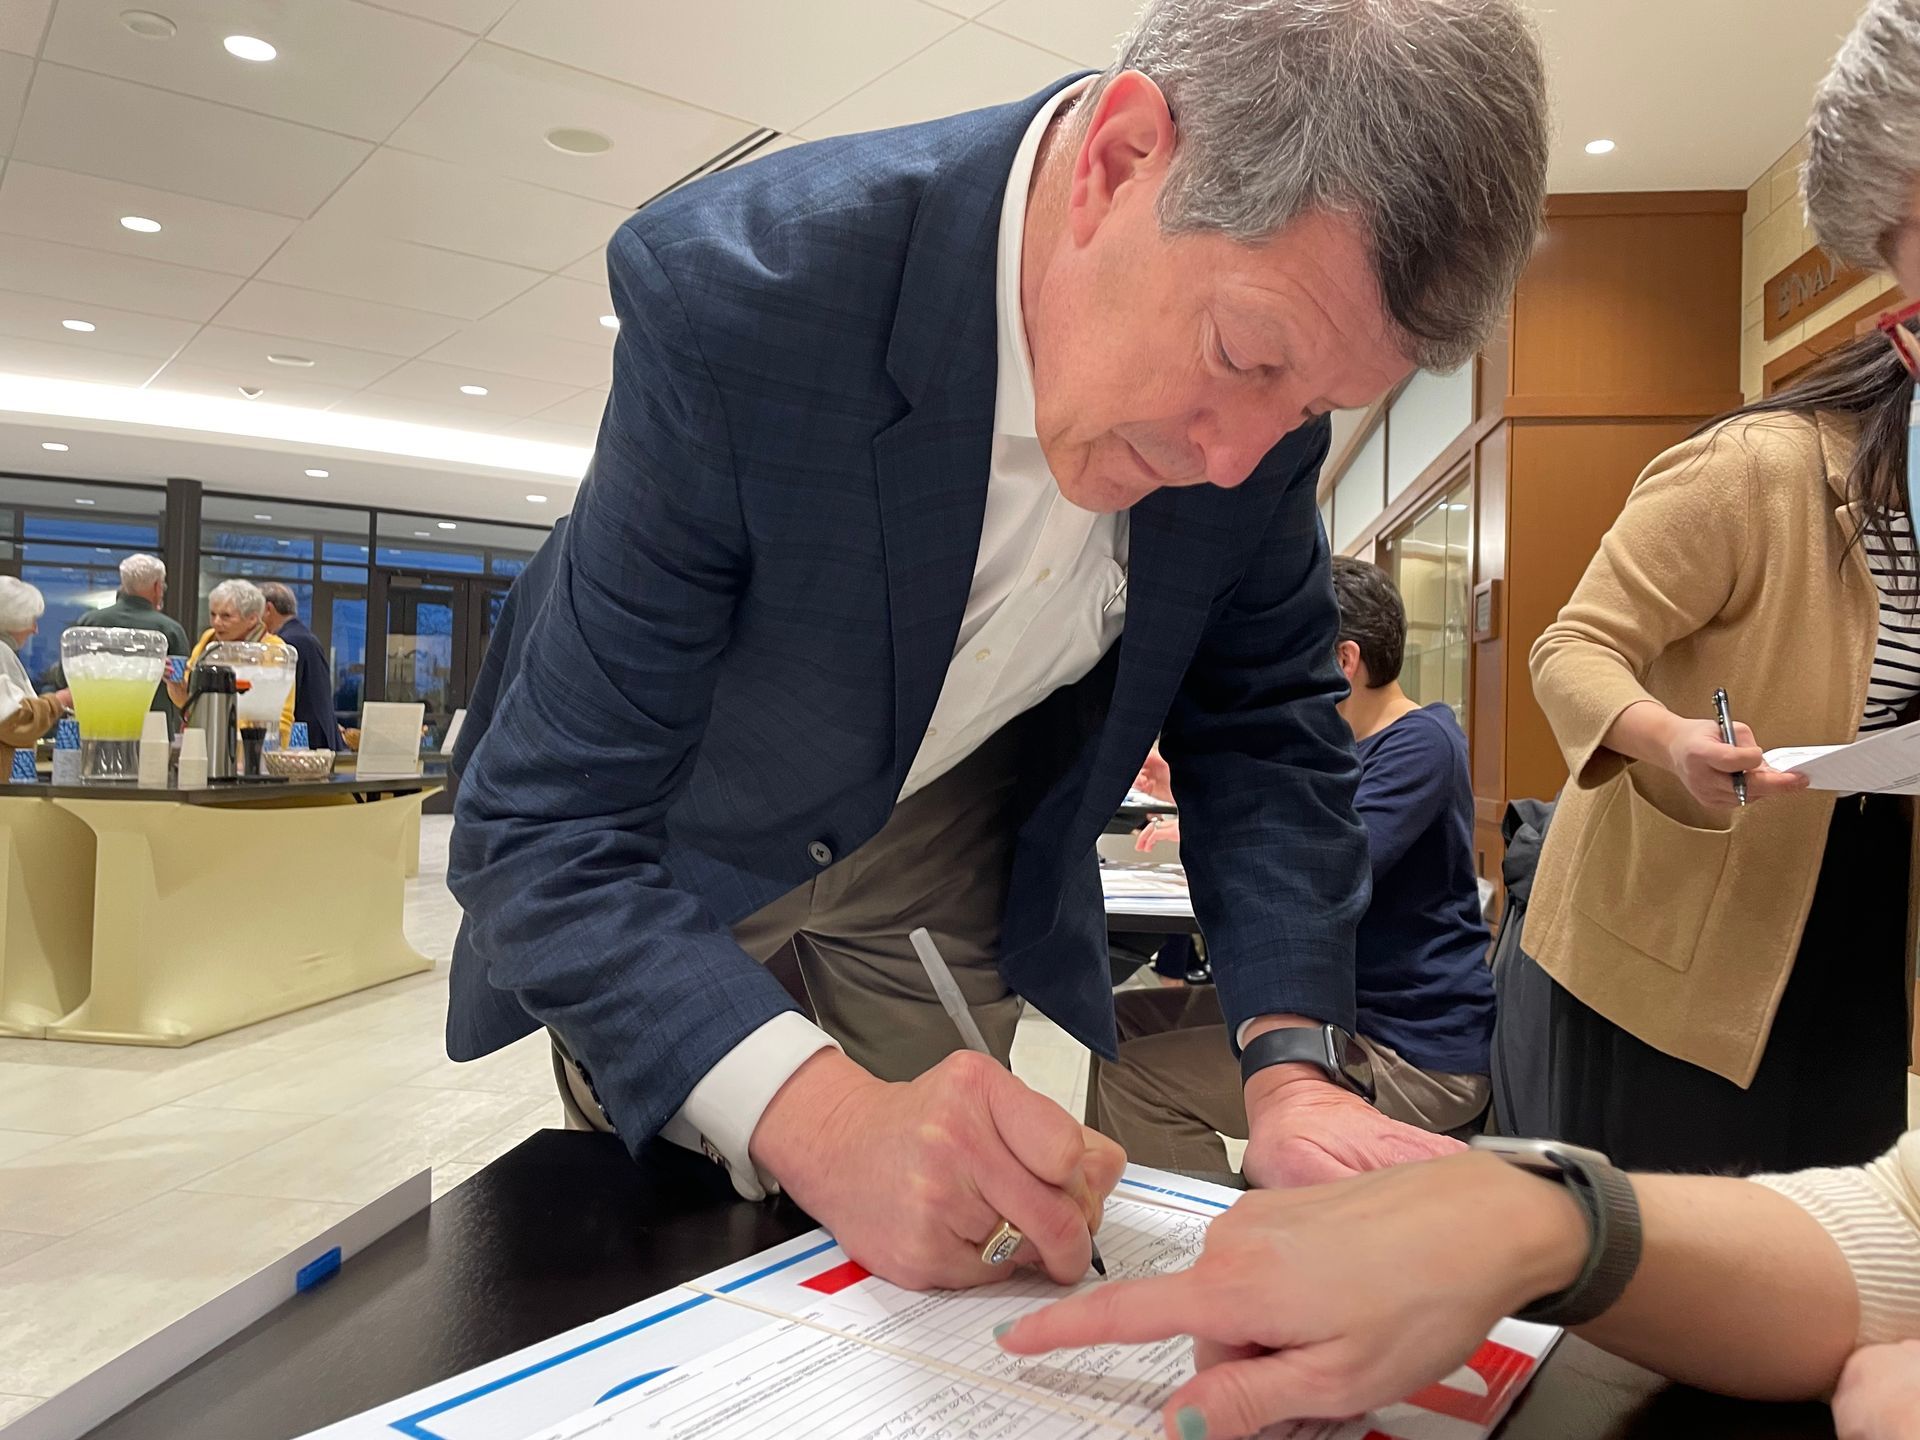 Joe Pereles signing a document at an event